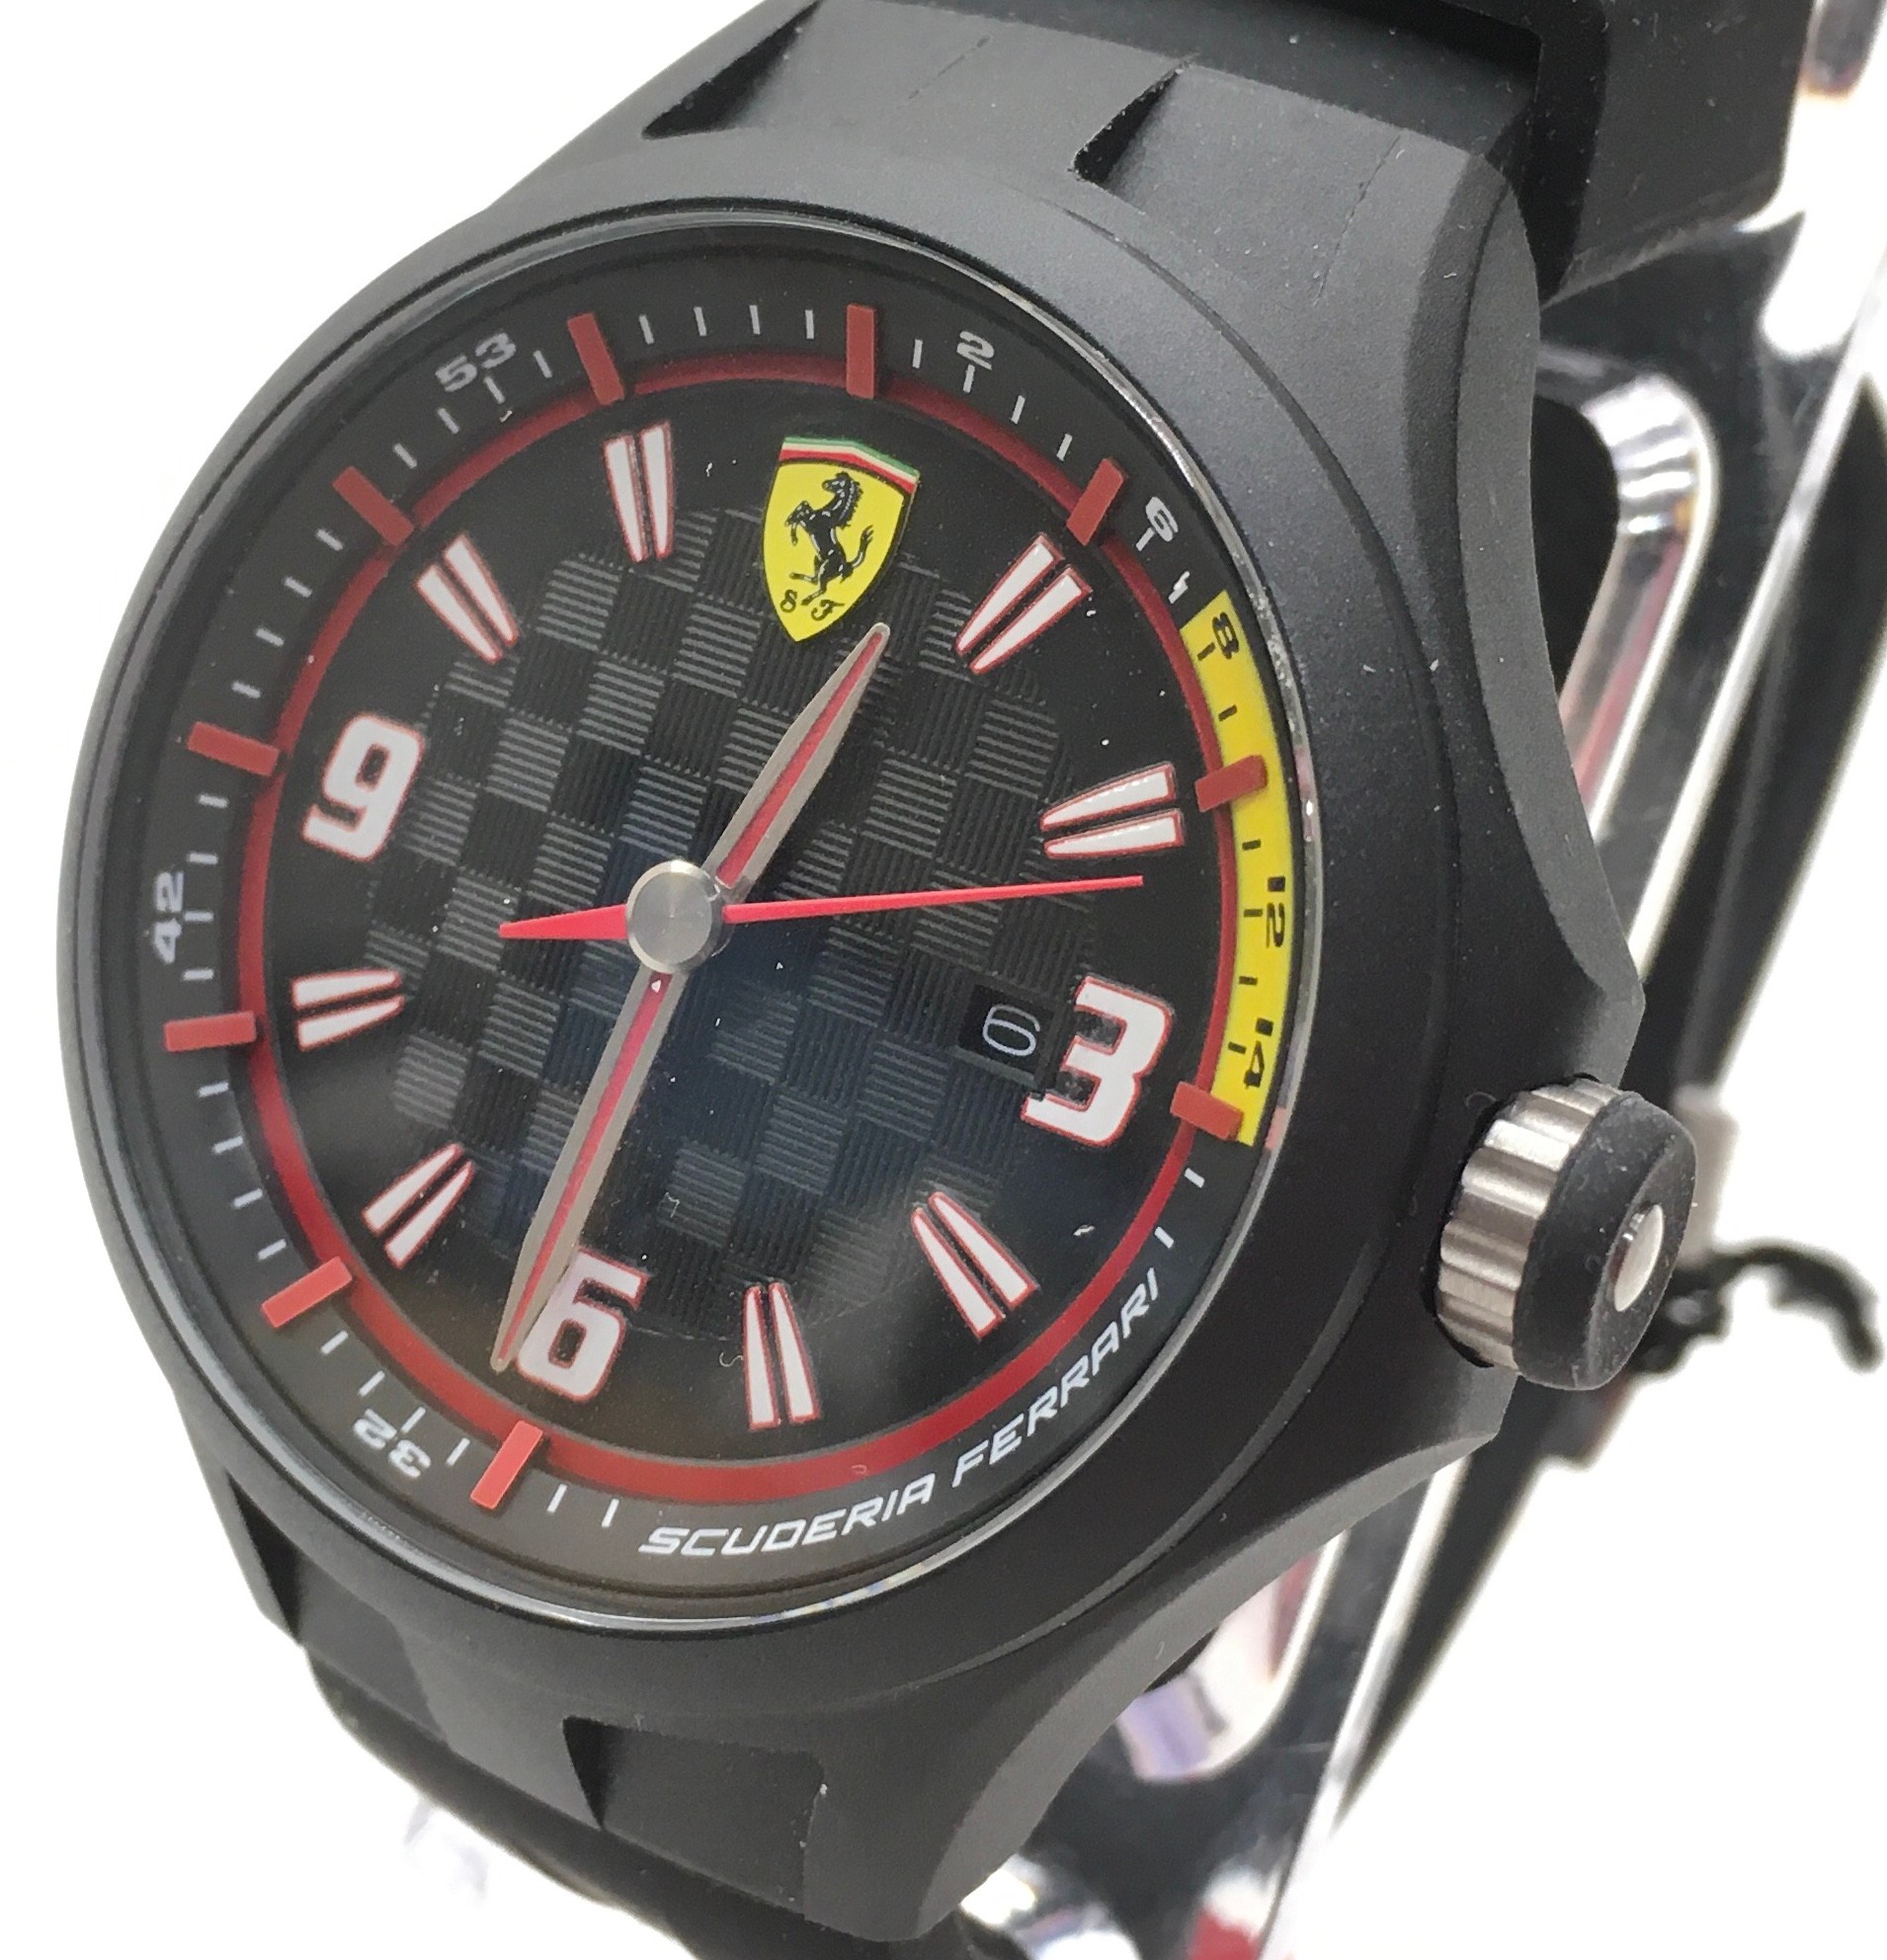 Collectible gents Ferrari quartz watch boxed with swing tags attached. Model ref SF.01.1.47.0070